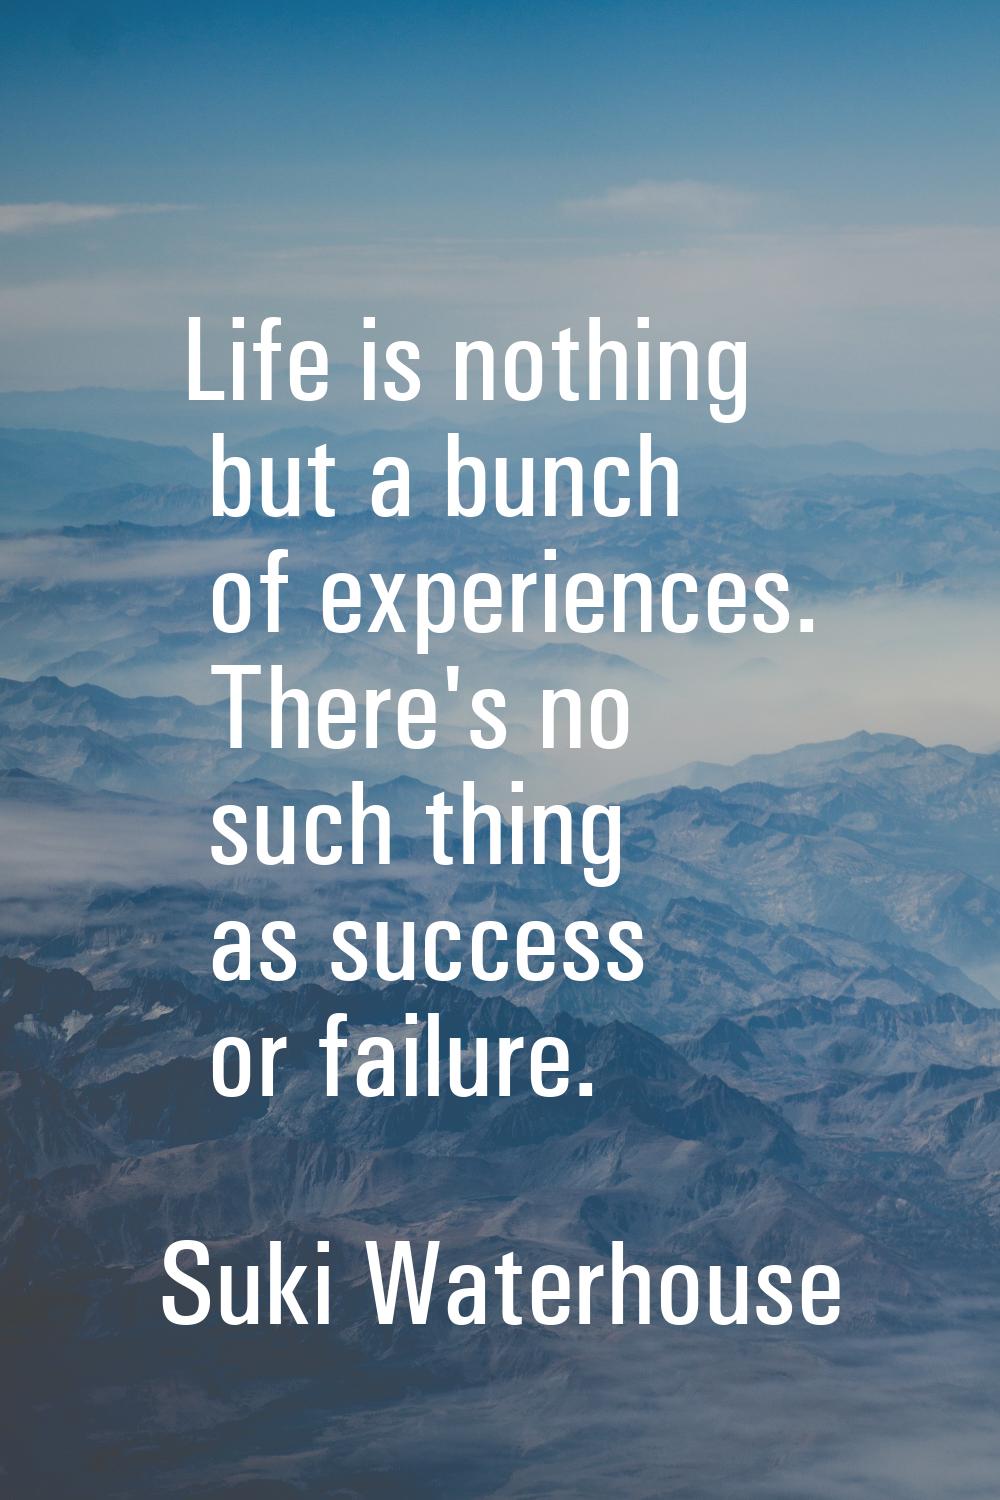 Life is nothing but a bunch of experiences. There's no such thing as success or failure.